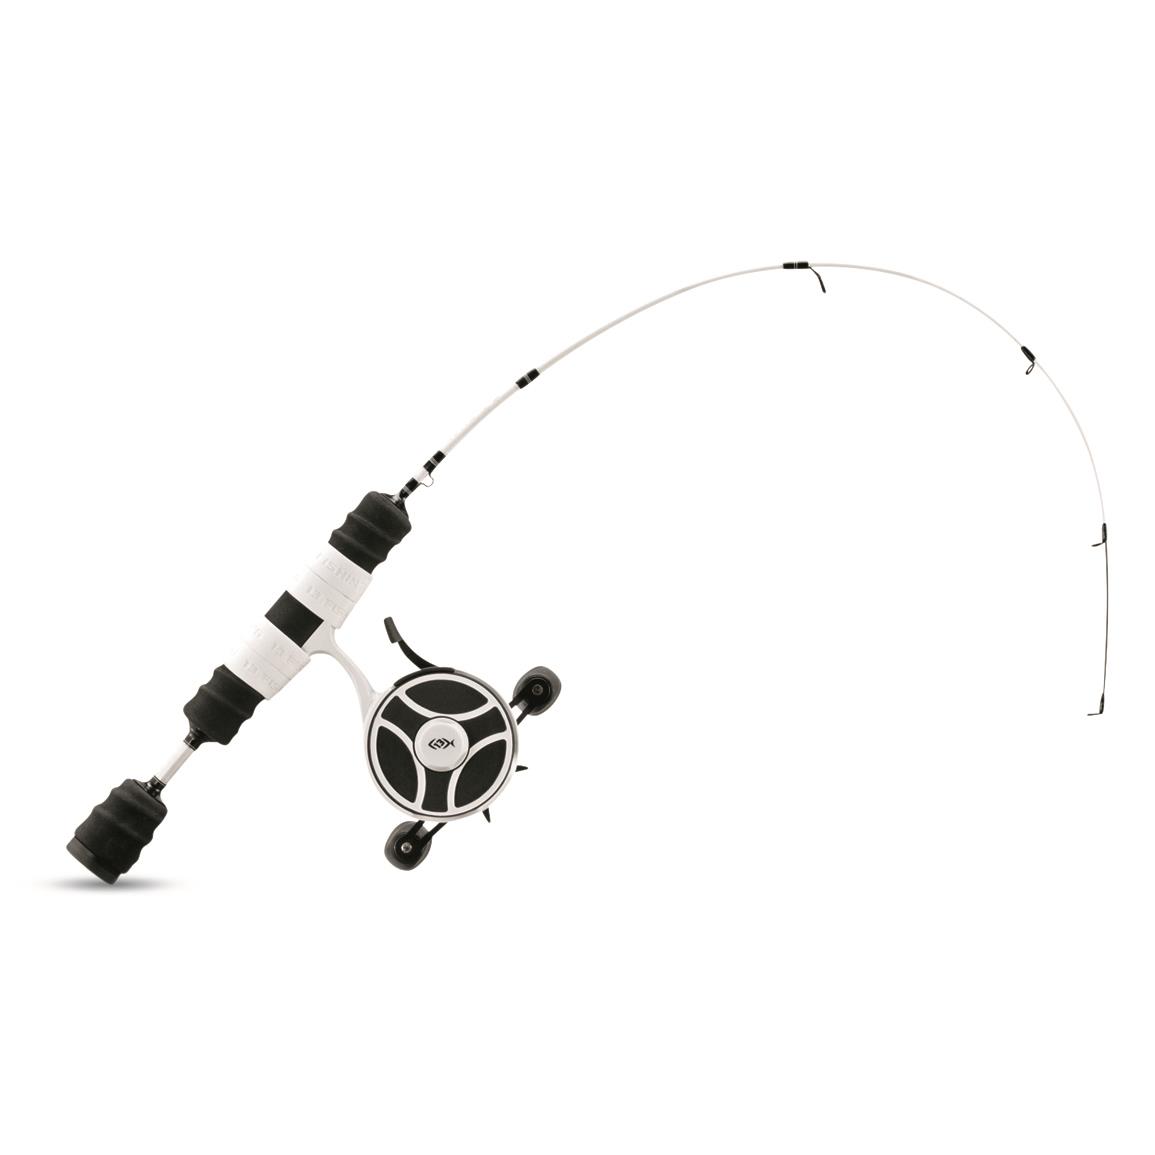 13 Fishing Wicked Ice Hornet Ice Fishing Combo, 27 Length, Ultra Light  Power - 723684, Ice Fishing Combos at Sportsman's Guide